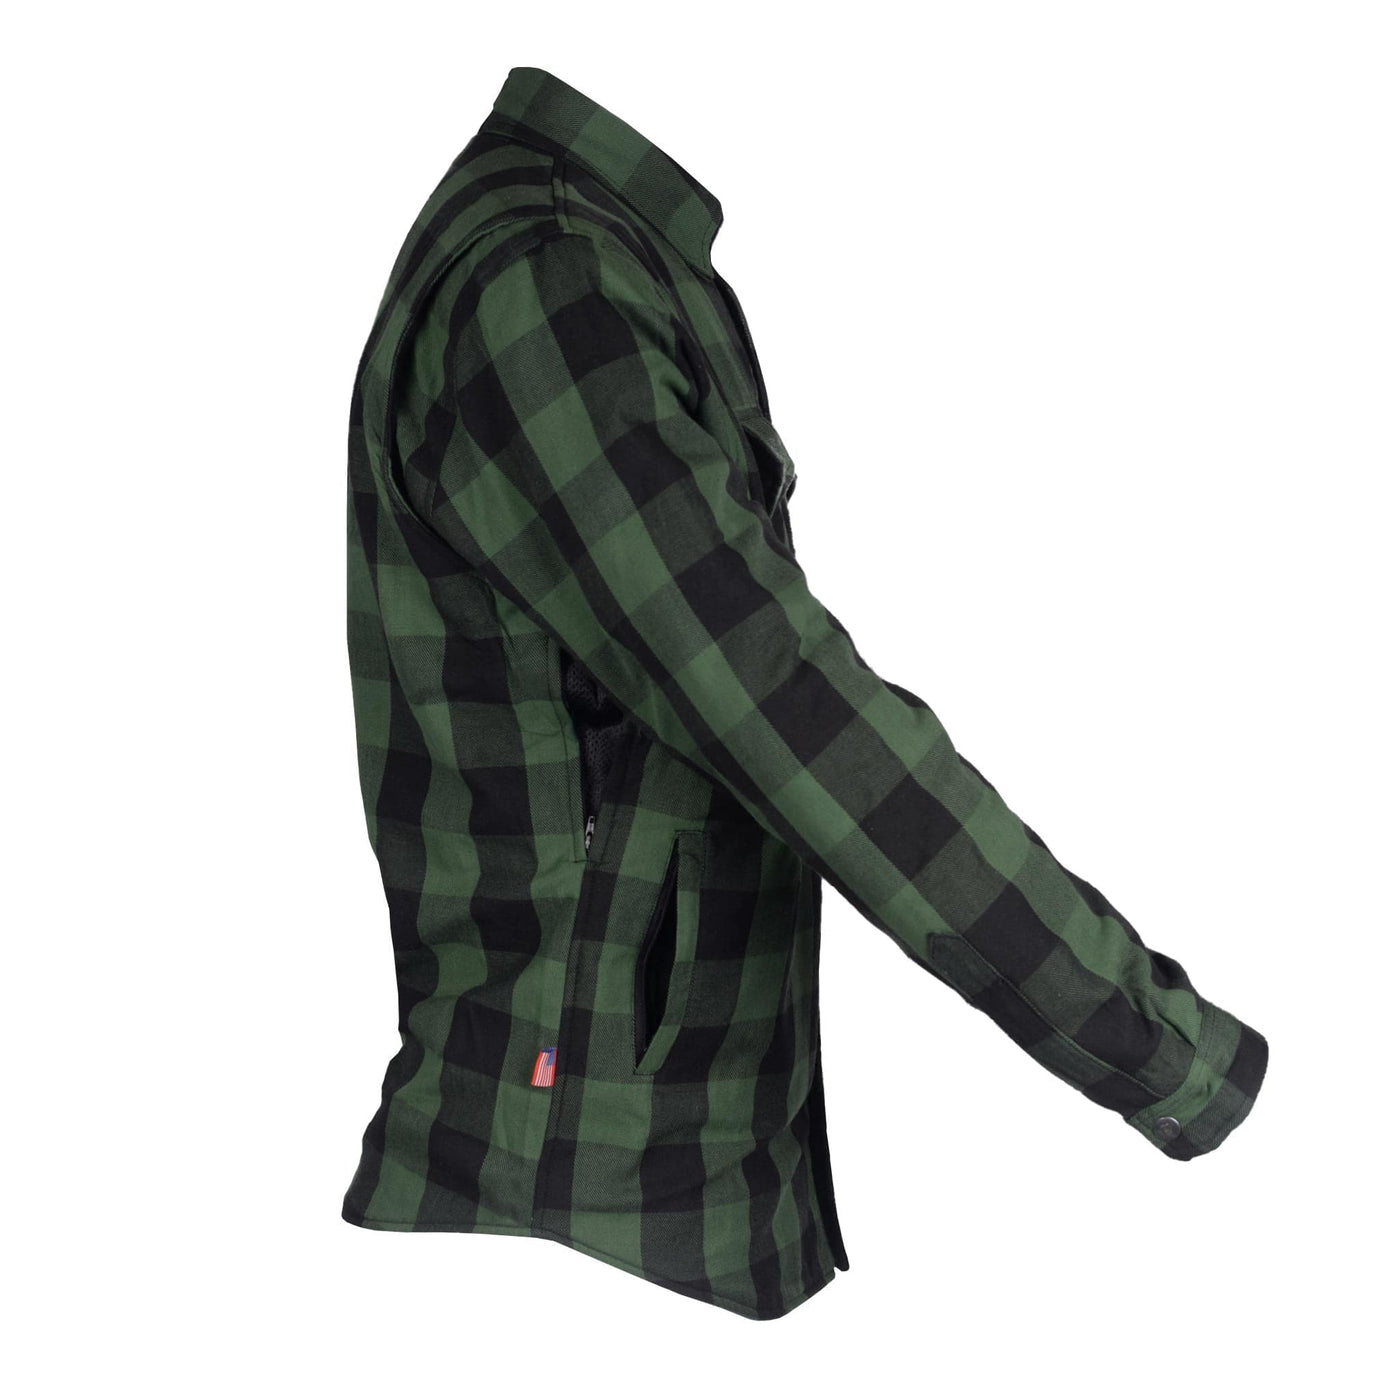 Protective Flannel Shirt with Pads "Forest Fury" - Green and Black